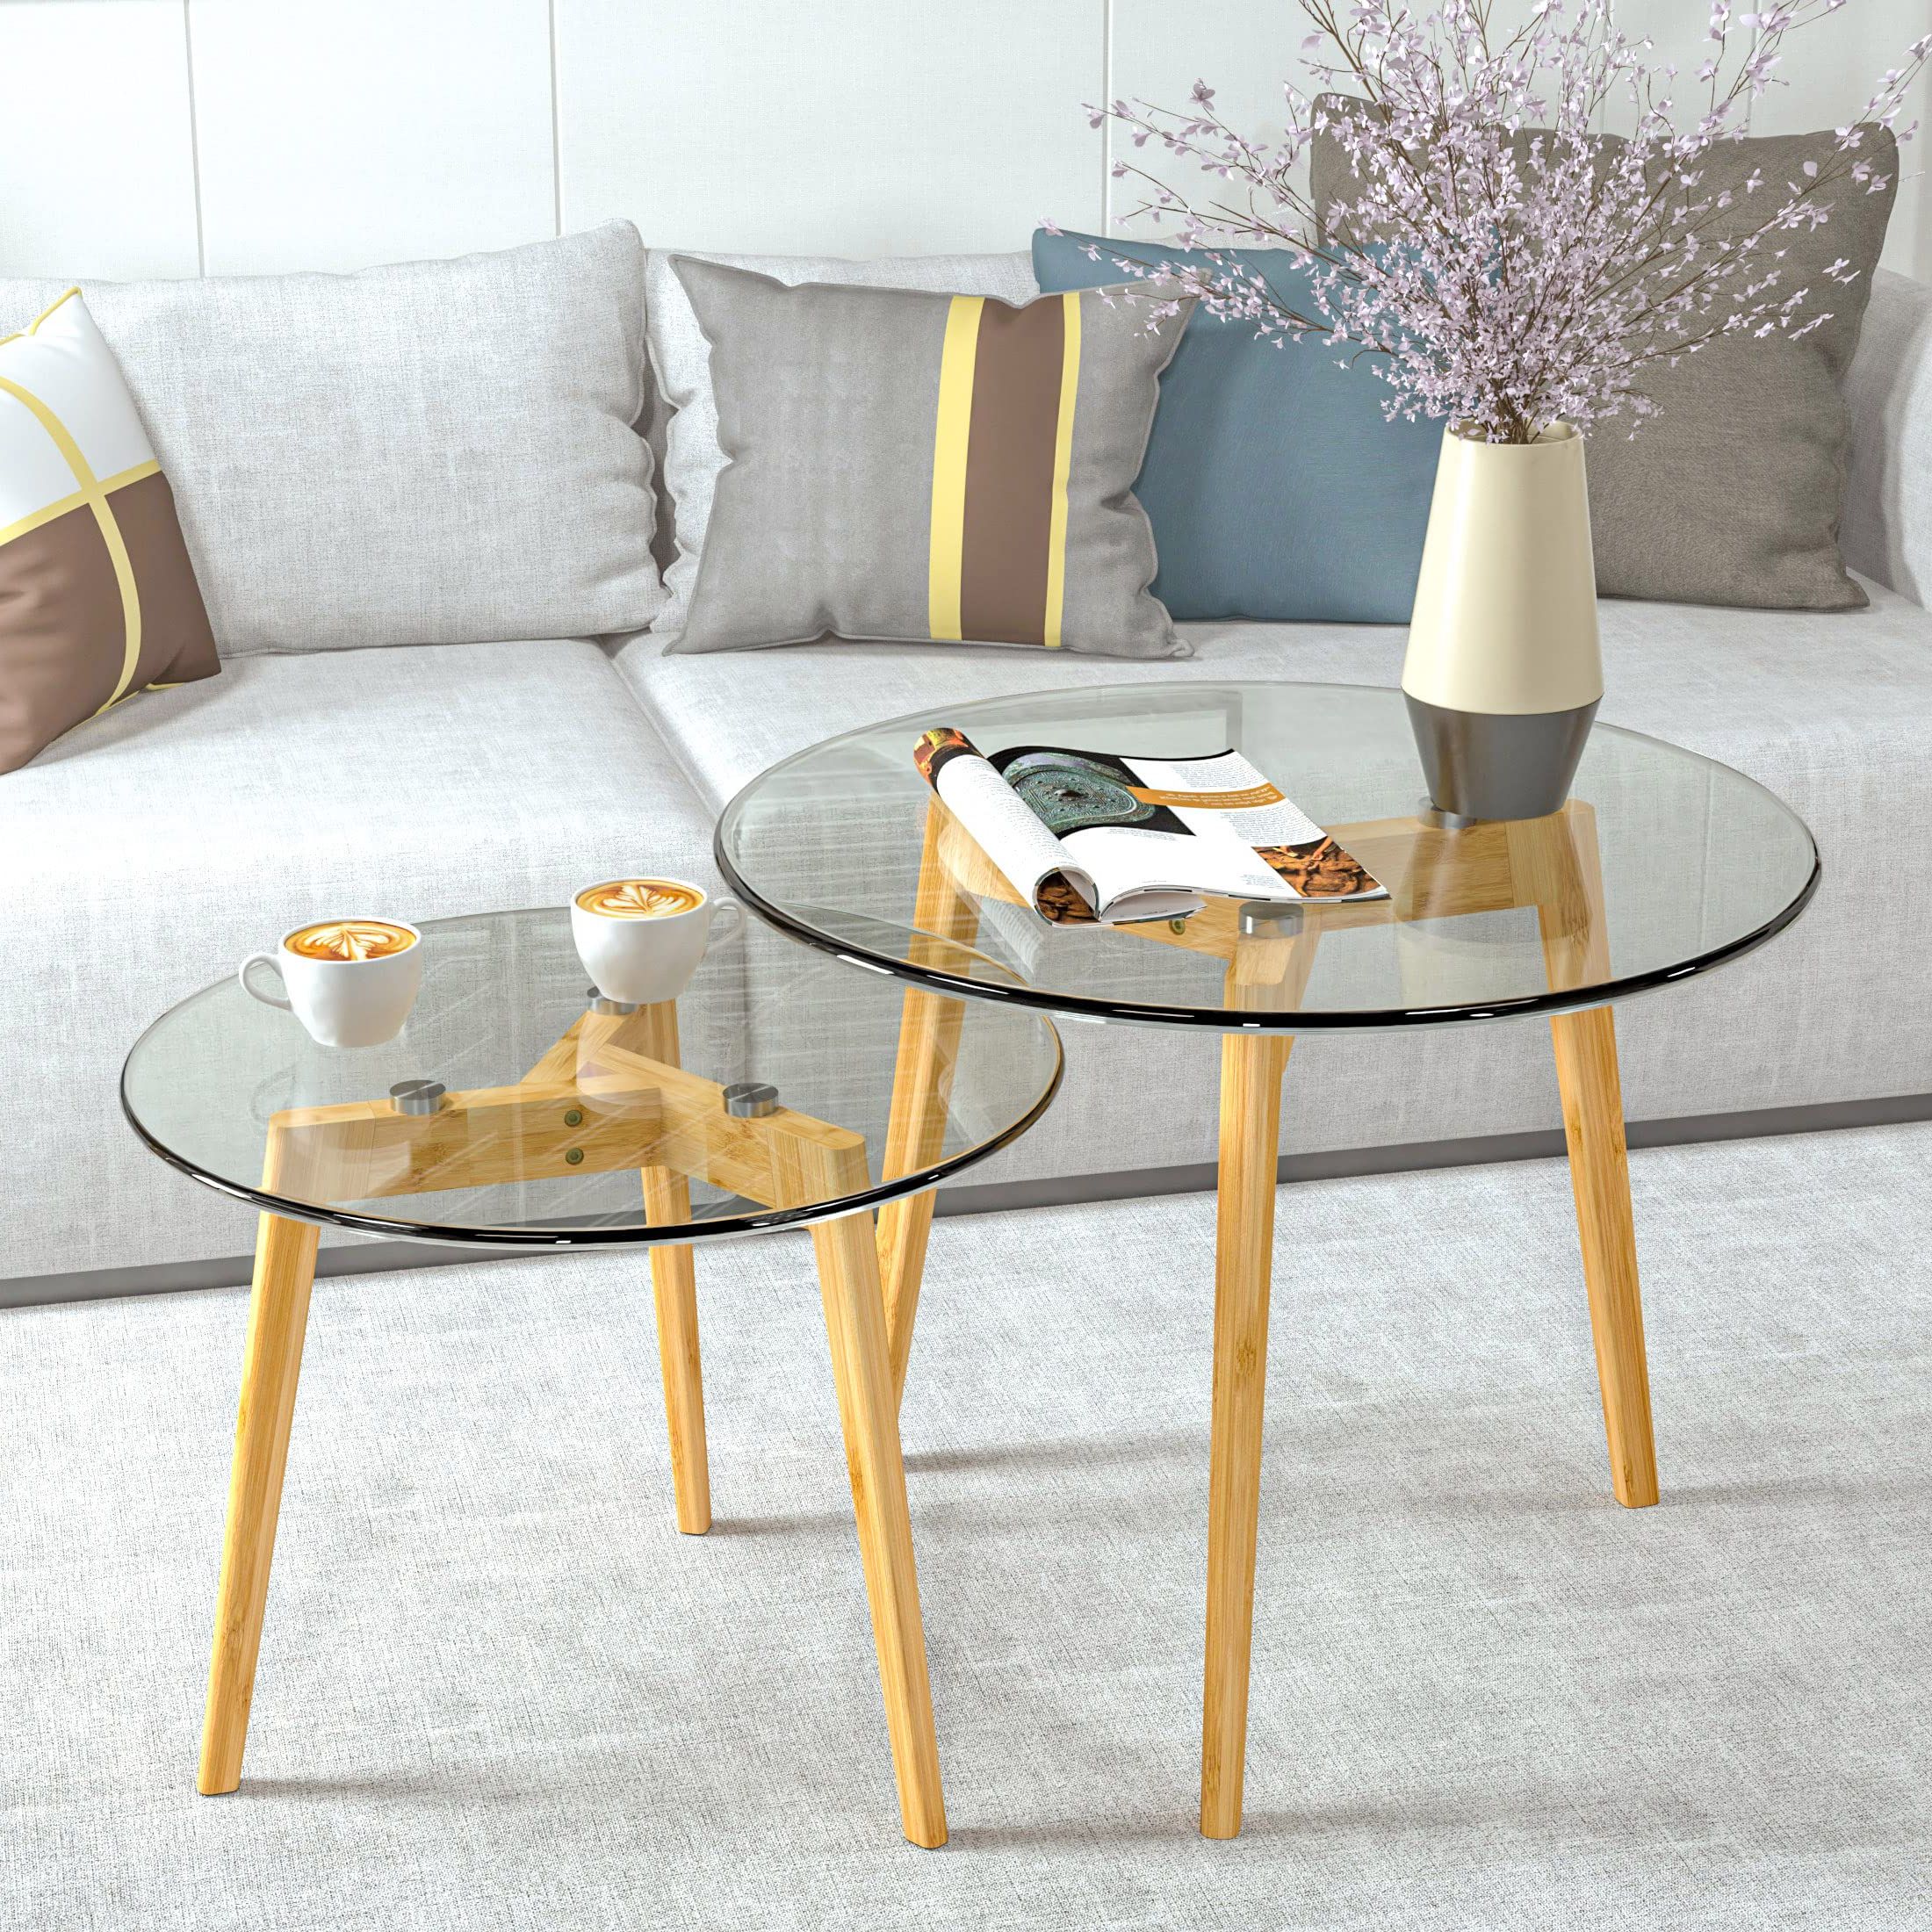 Newest Transparent Side Tables For Living Rooms Intended For Amazon: Bambloom Glass Coffee Table, Round Clear Nesting Tables Set Of  2, Transparent Modern Accent Living Room Side Table End For Home Office  Apartment Sofa, Easy Assembly : Home & Kitchen (Photo 1 of 10)